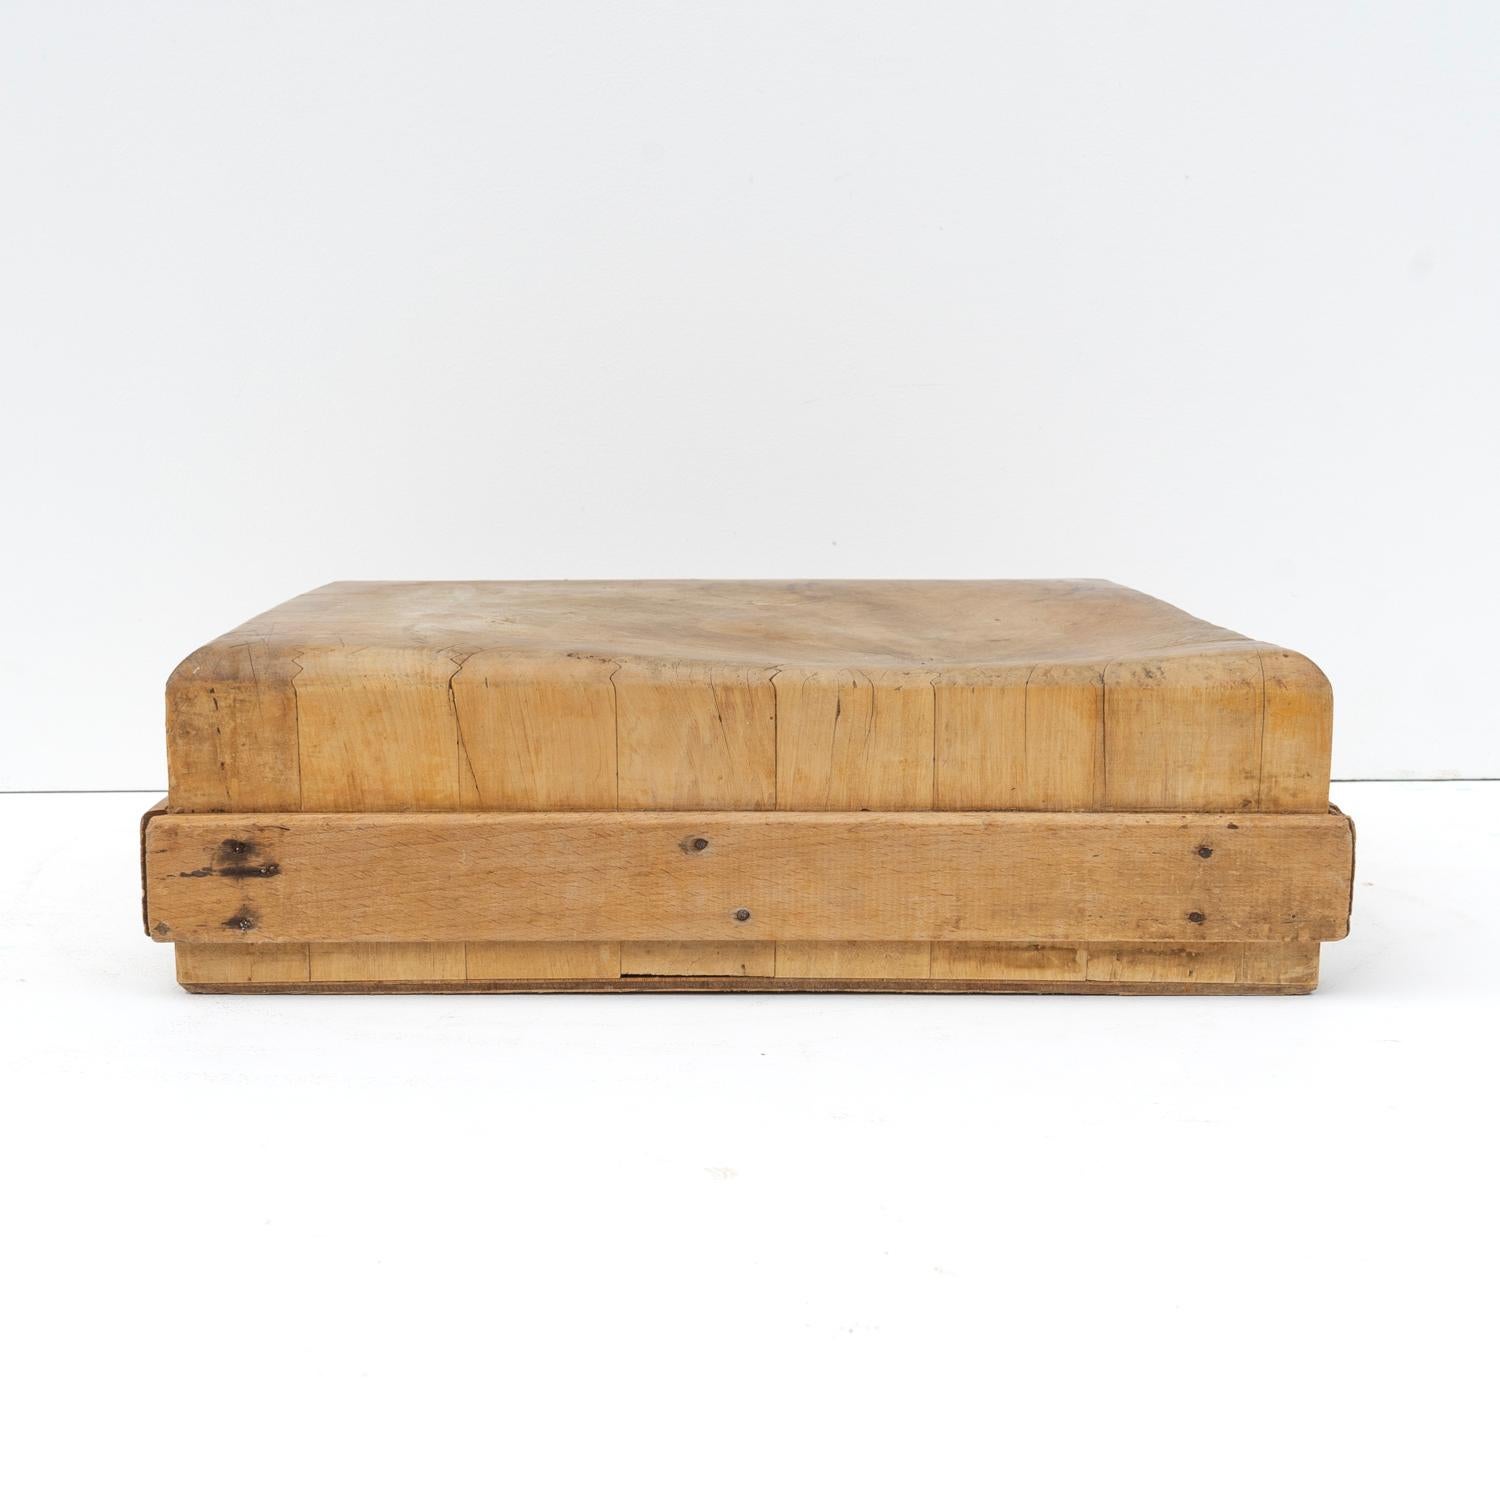 Vintage Wooden End Grain Butchers Block Chopping Board, Early-Mid 20th Century 1